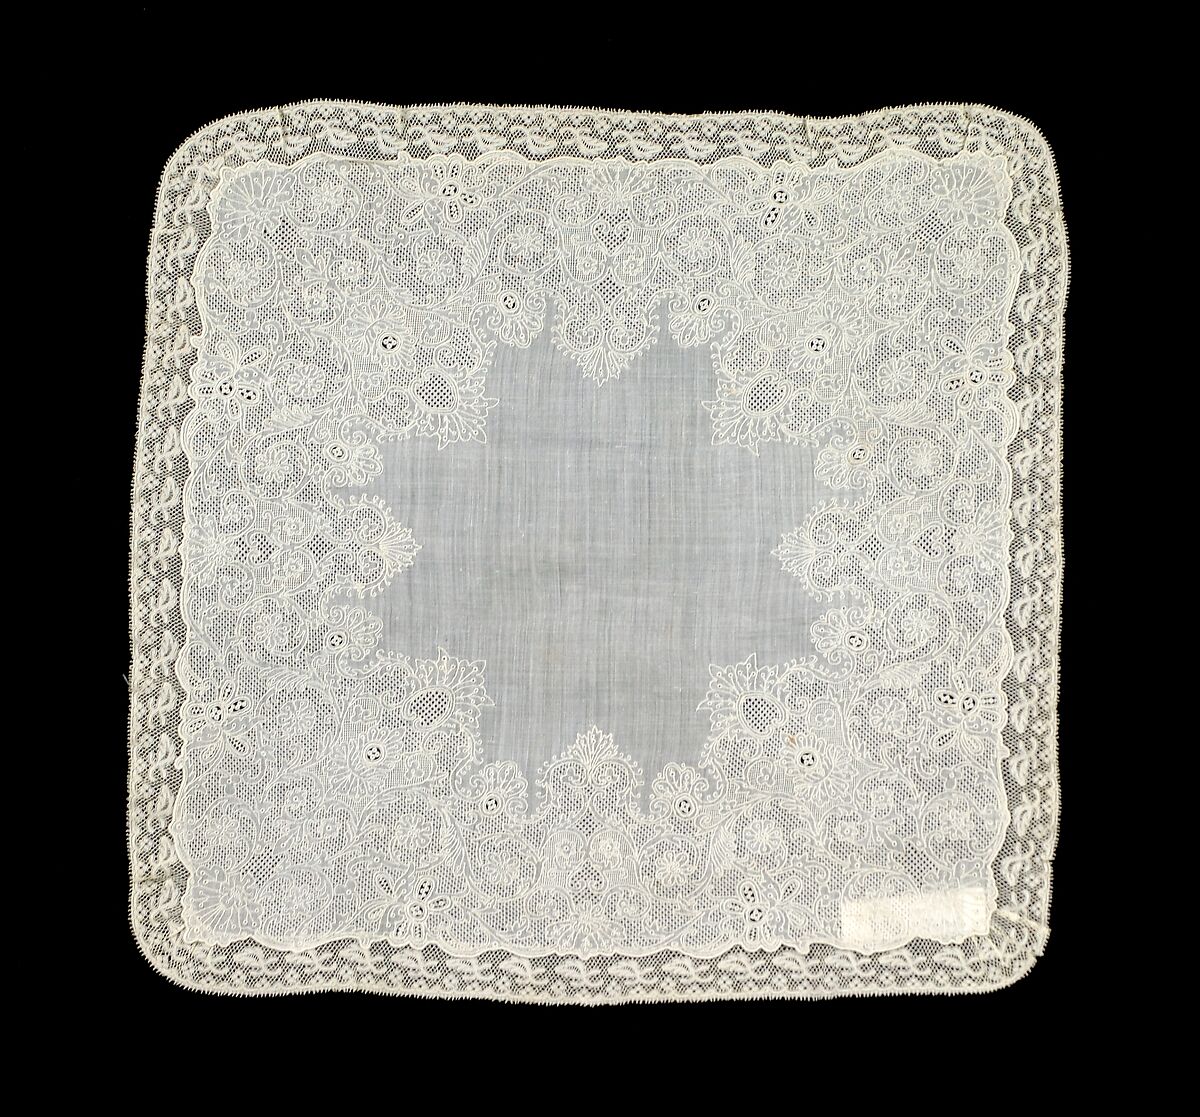 Handkerchief, Cotton, probably French 